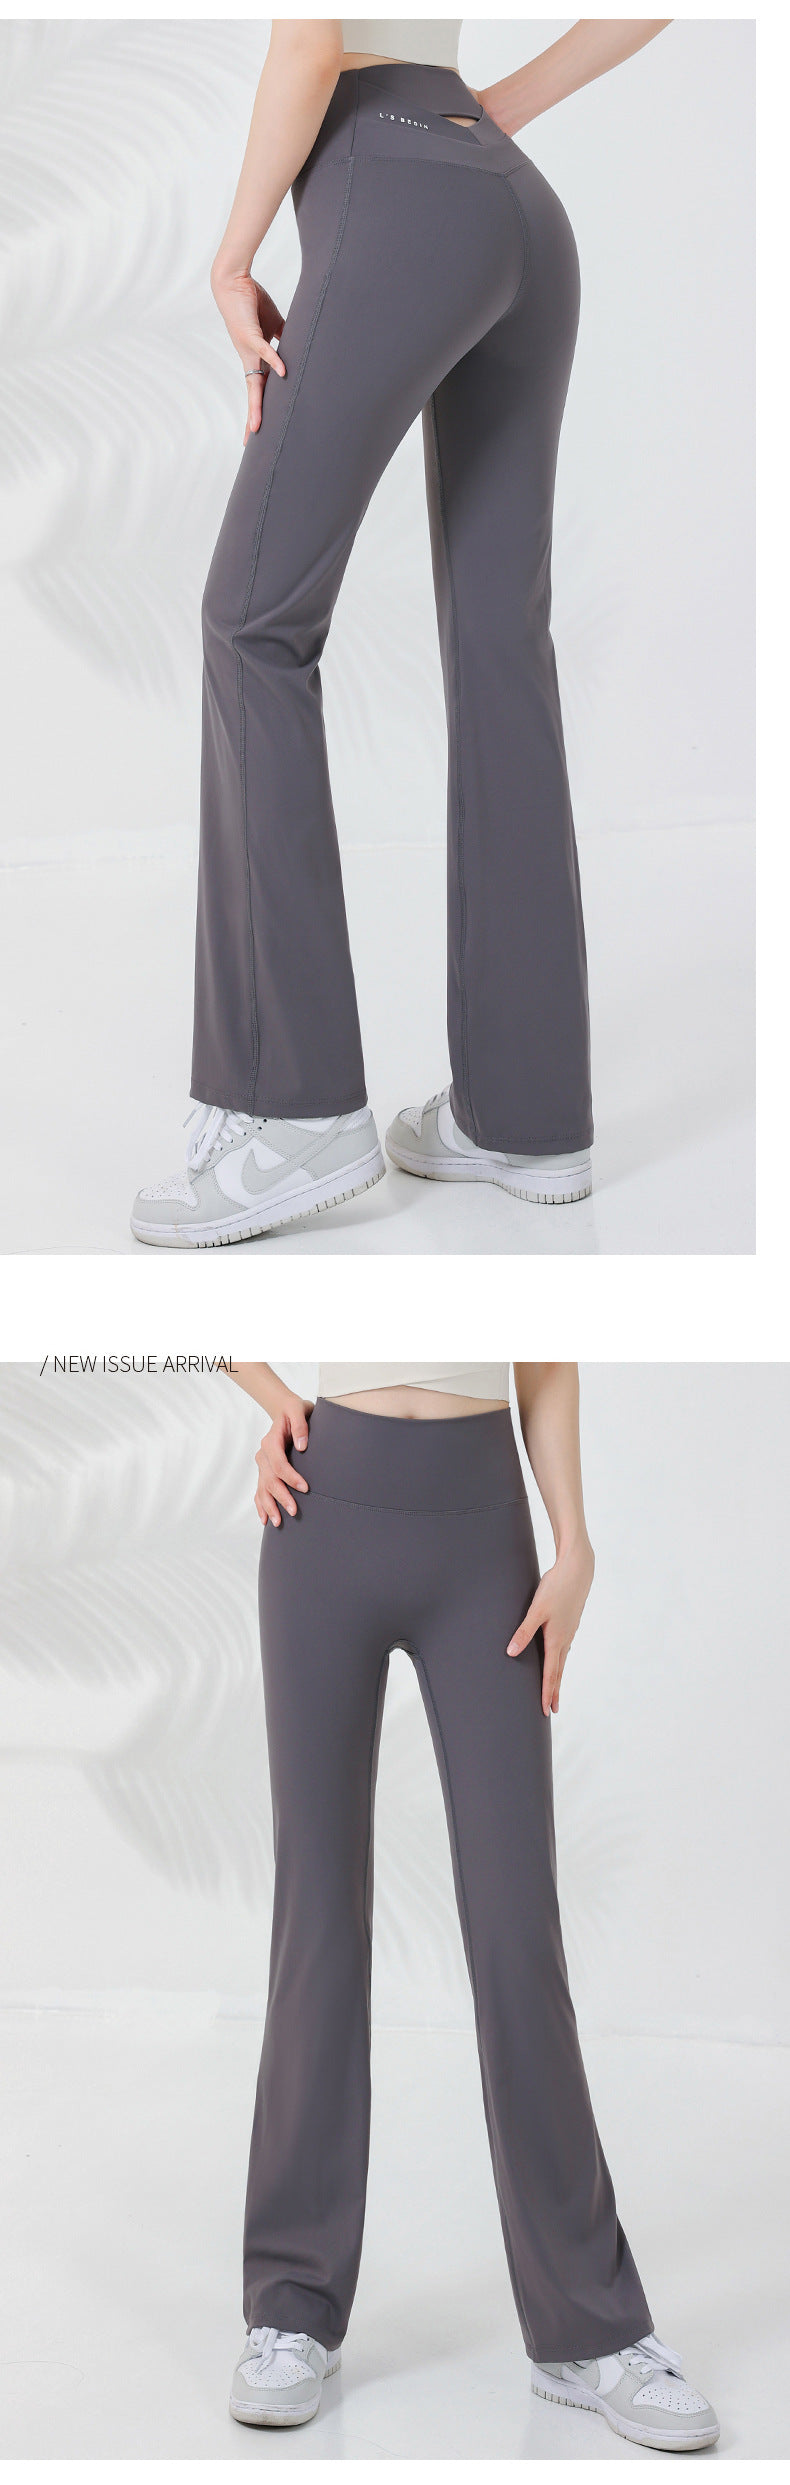 2023.08 skin-friendly yoga trousers women's high elastic belly cover legs back cross hollow peach hip fitness flared pants